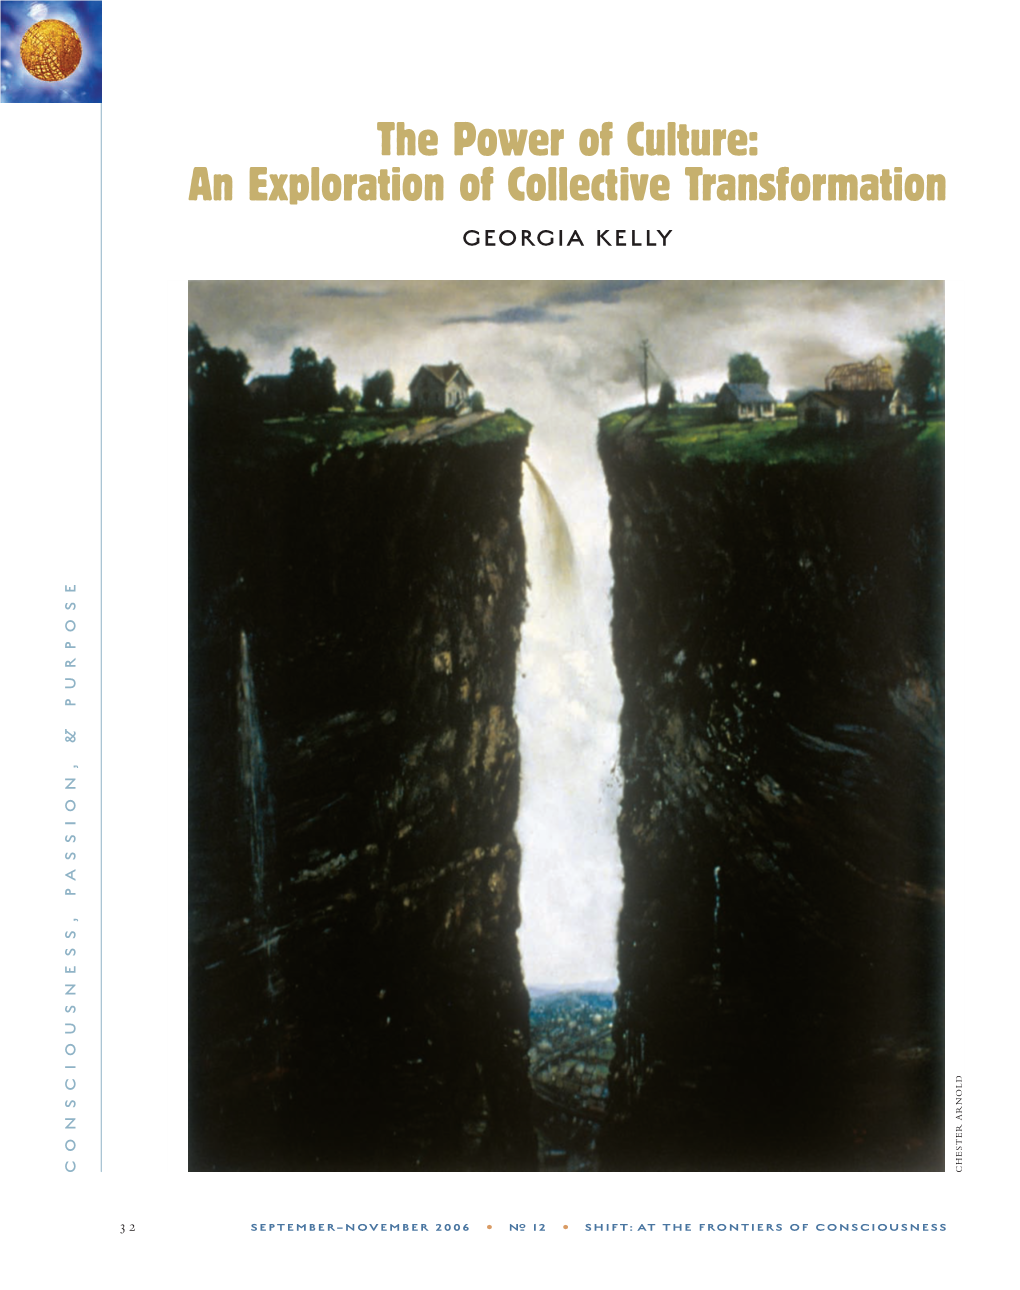 The Power of Culture: an Exploration of Collective Transformation GEORGIA KELLY CHESTER ARNOLD CONSCIOUSNESS, PASSION, & PURPOSE PASSION, CONSCIOUSNESS